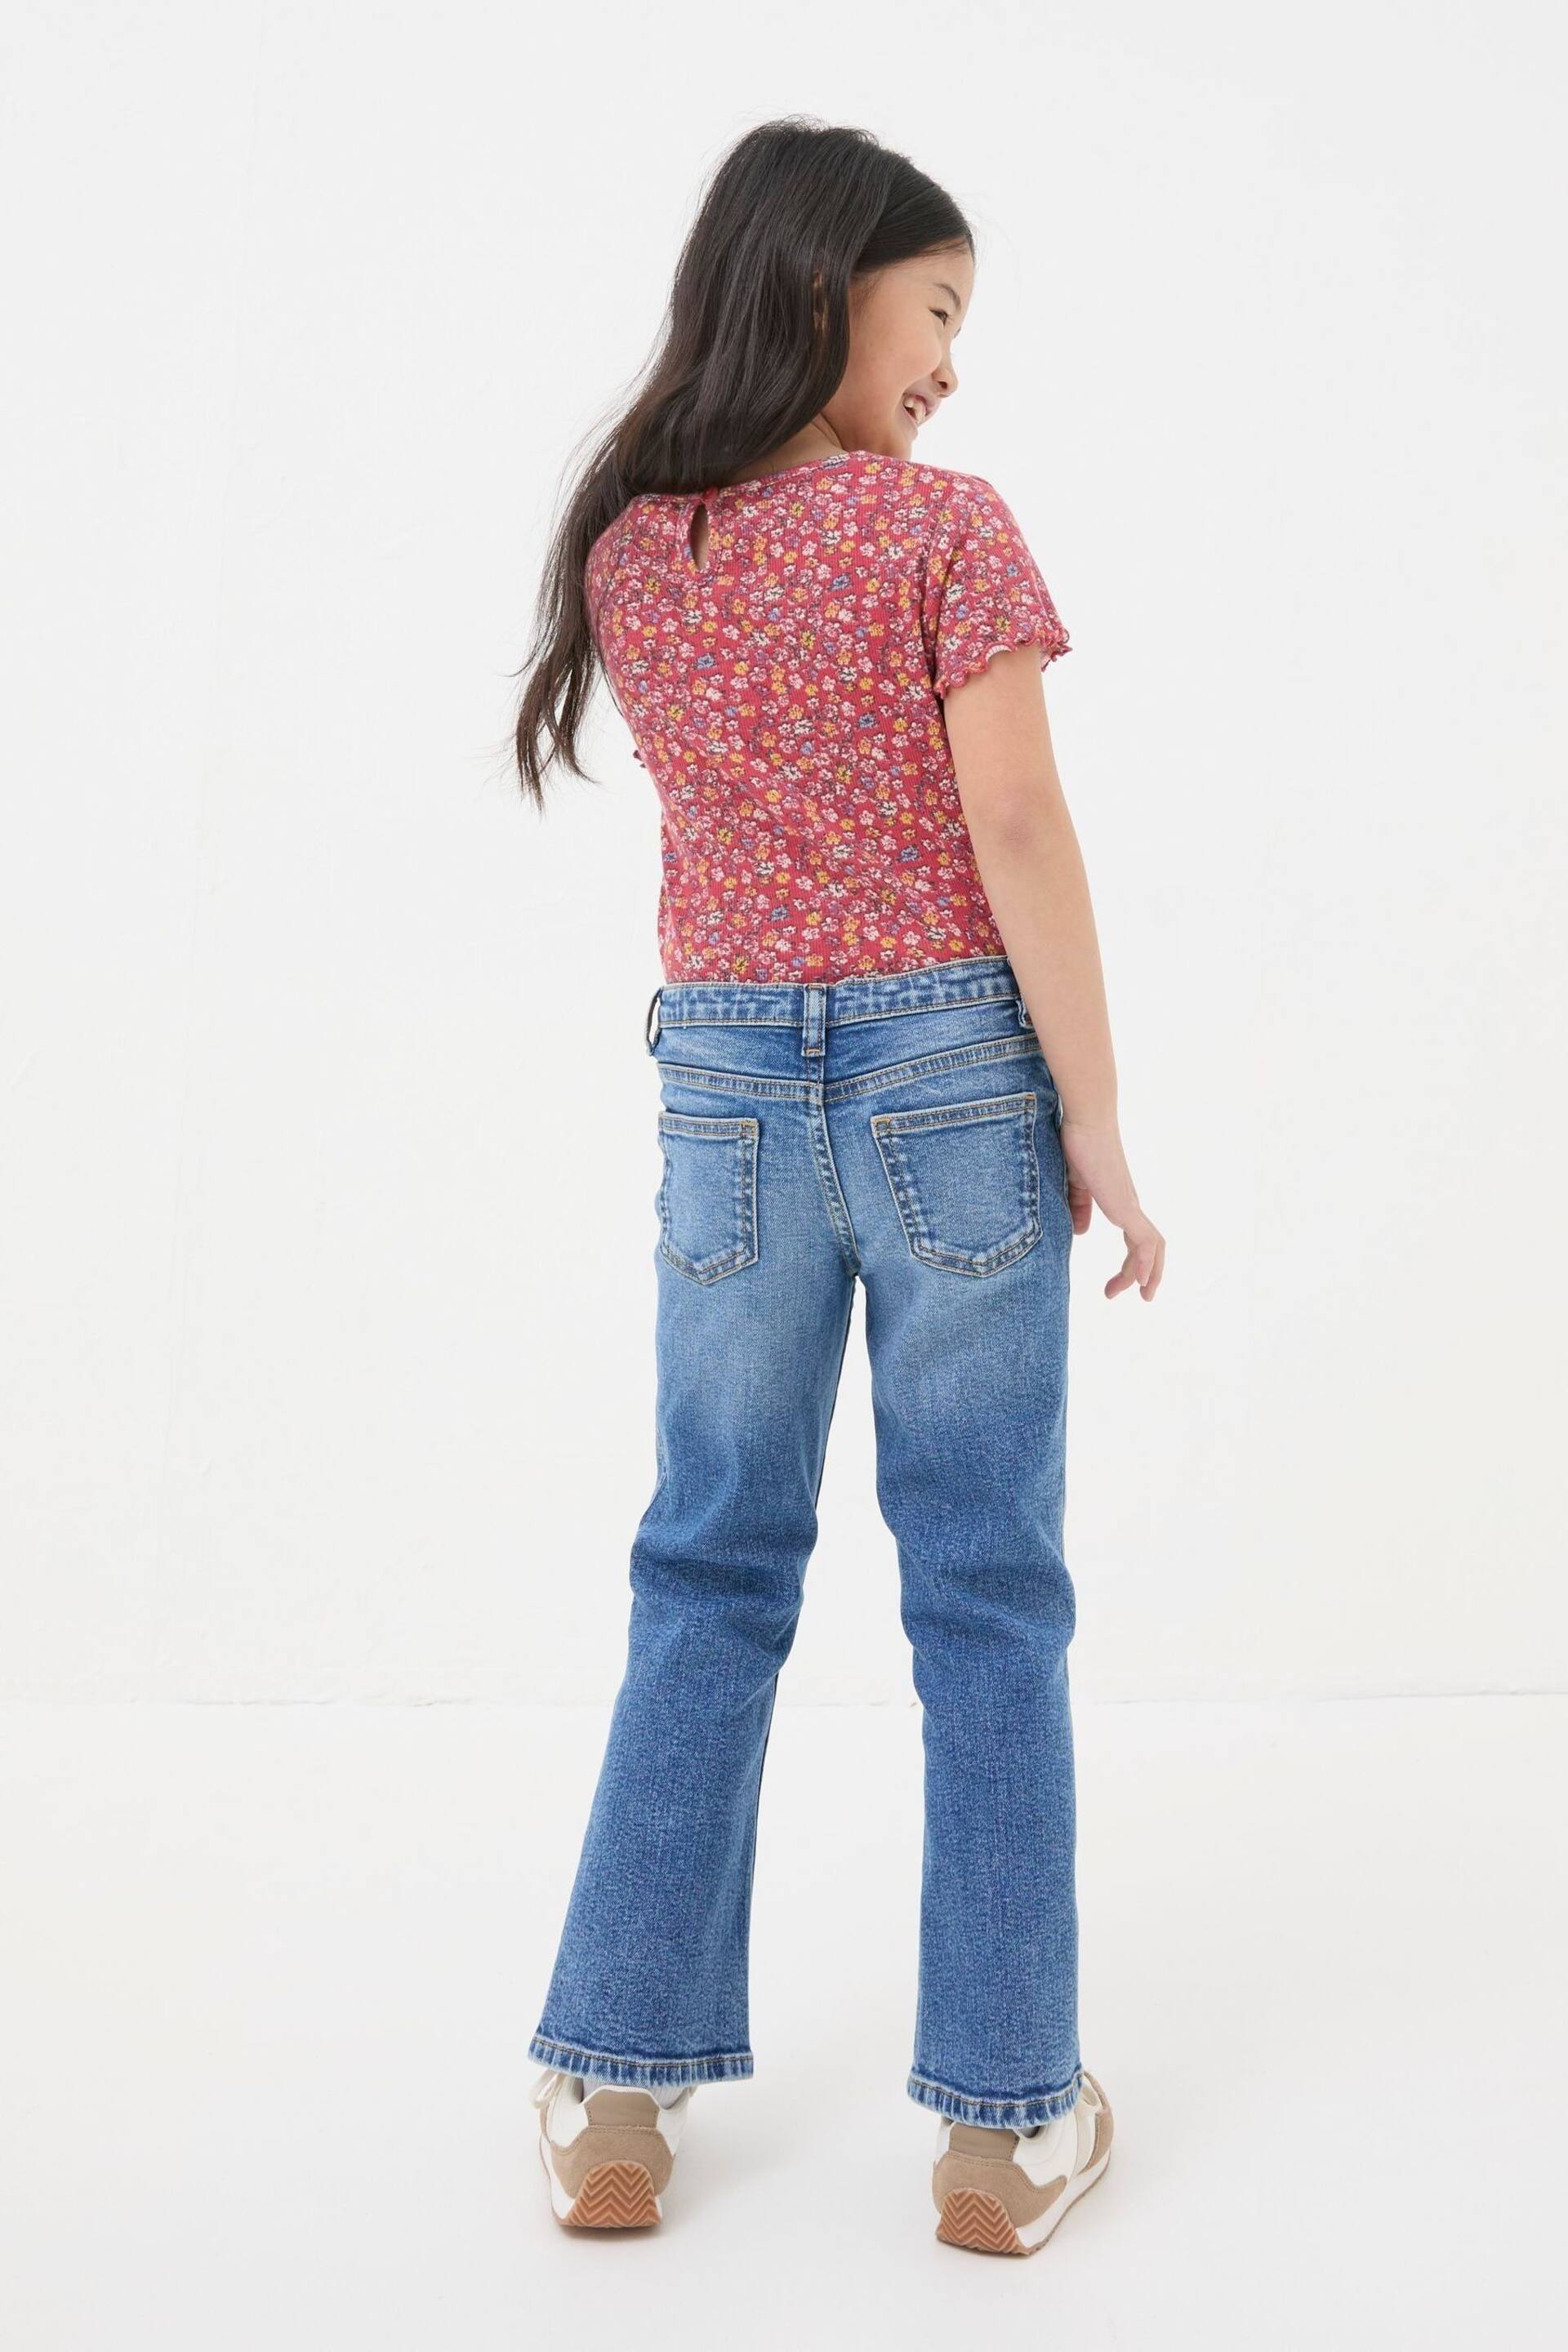 FatFace Blue Flared Denim Jeans - Image 2 of 5